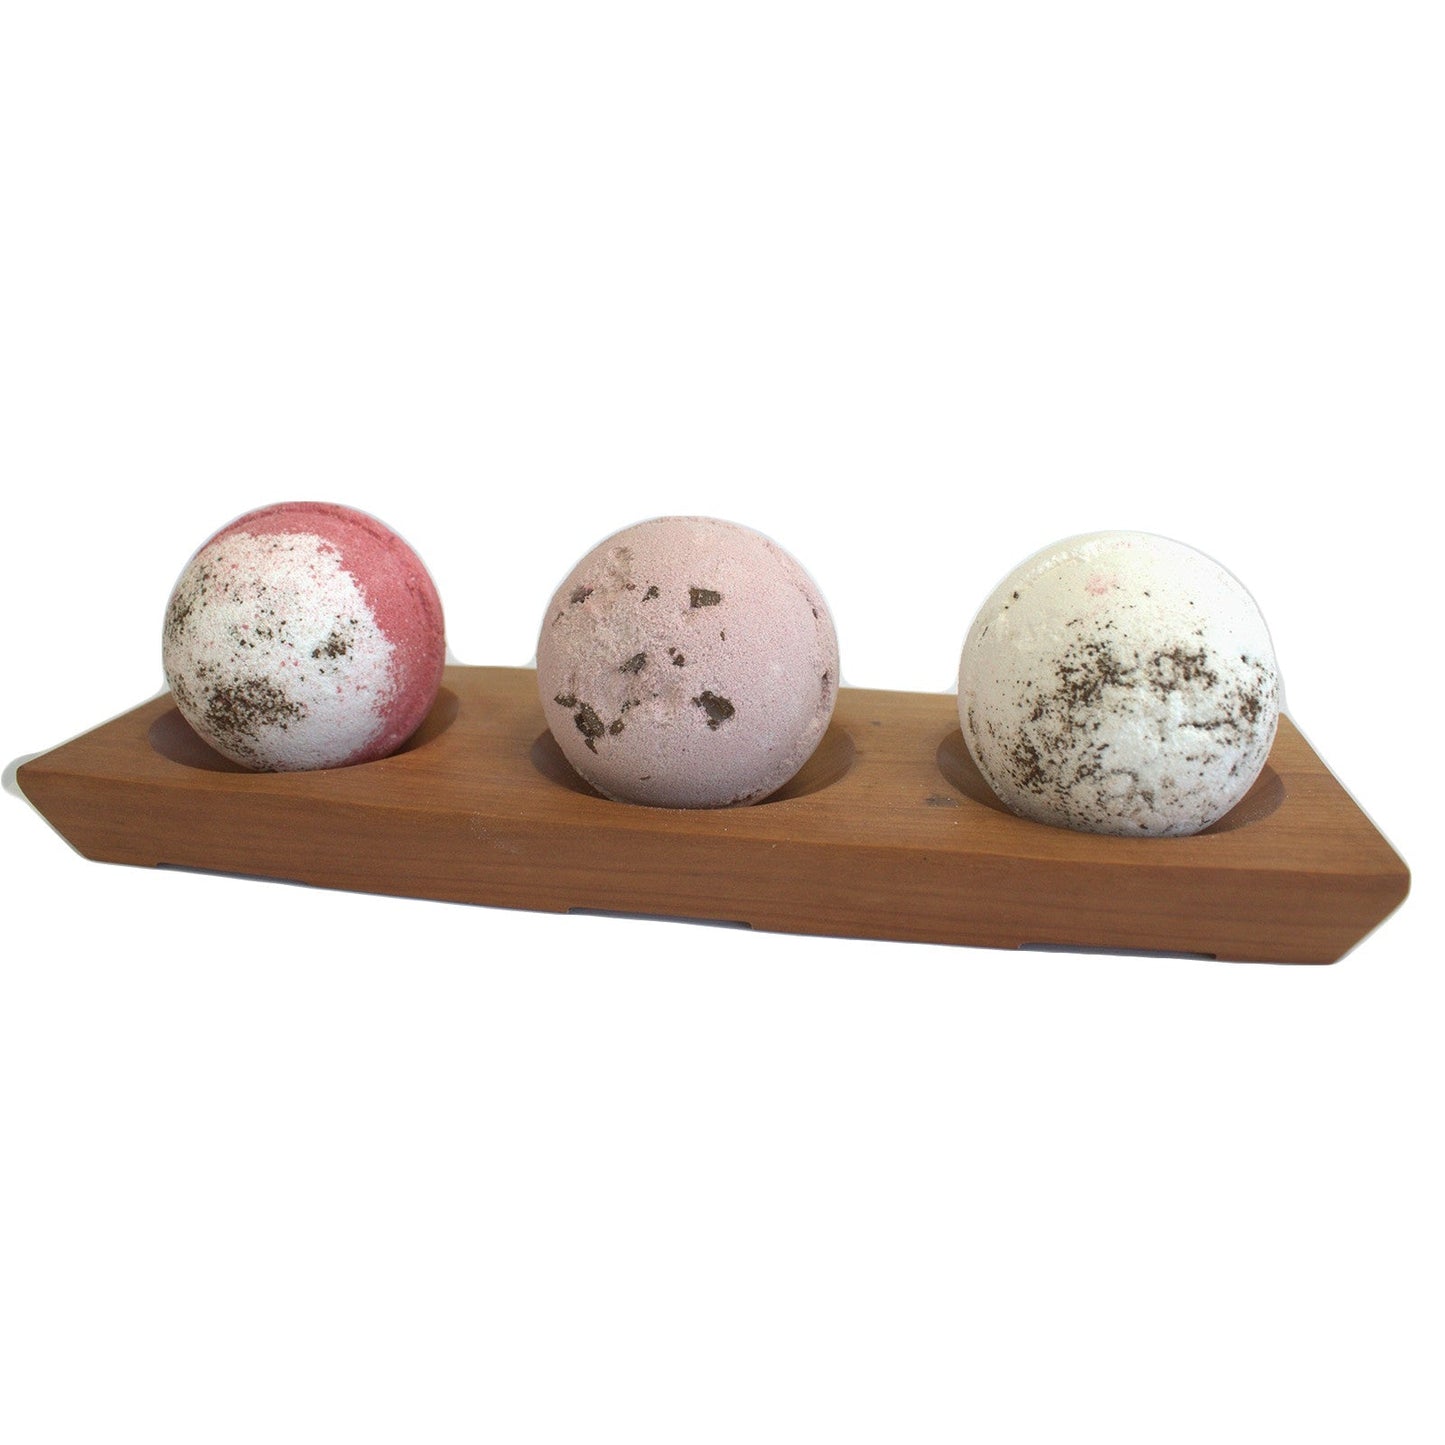 Wooden bath bomb holder on a white background. The bath bomb holder has three large bath bombs on it, one bath bomb in slightly dipped bay which is there to hold the bath bombs. Bath Bombs are pink with white, light pink and white. Each of the bath bombs in the bath bomb holder has some sort floral decoration on the top.